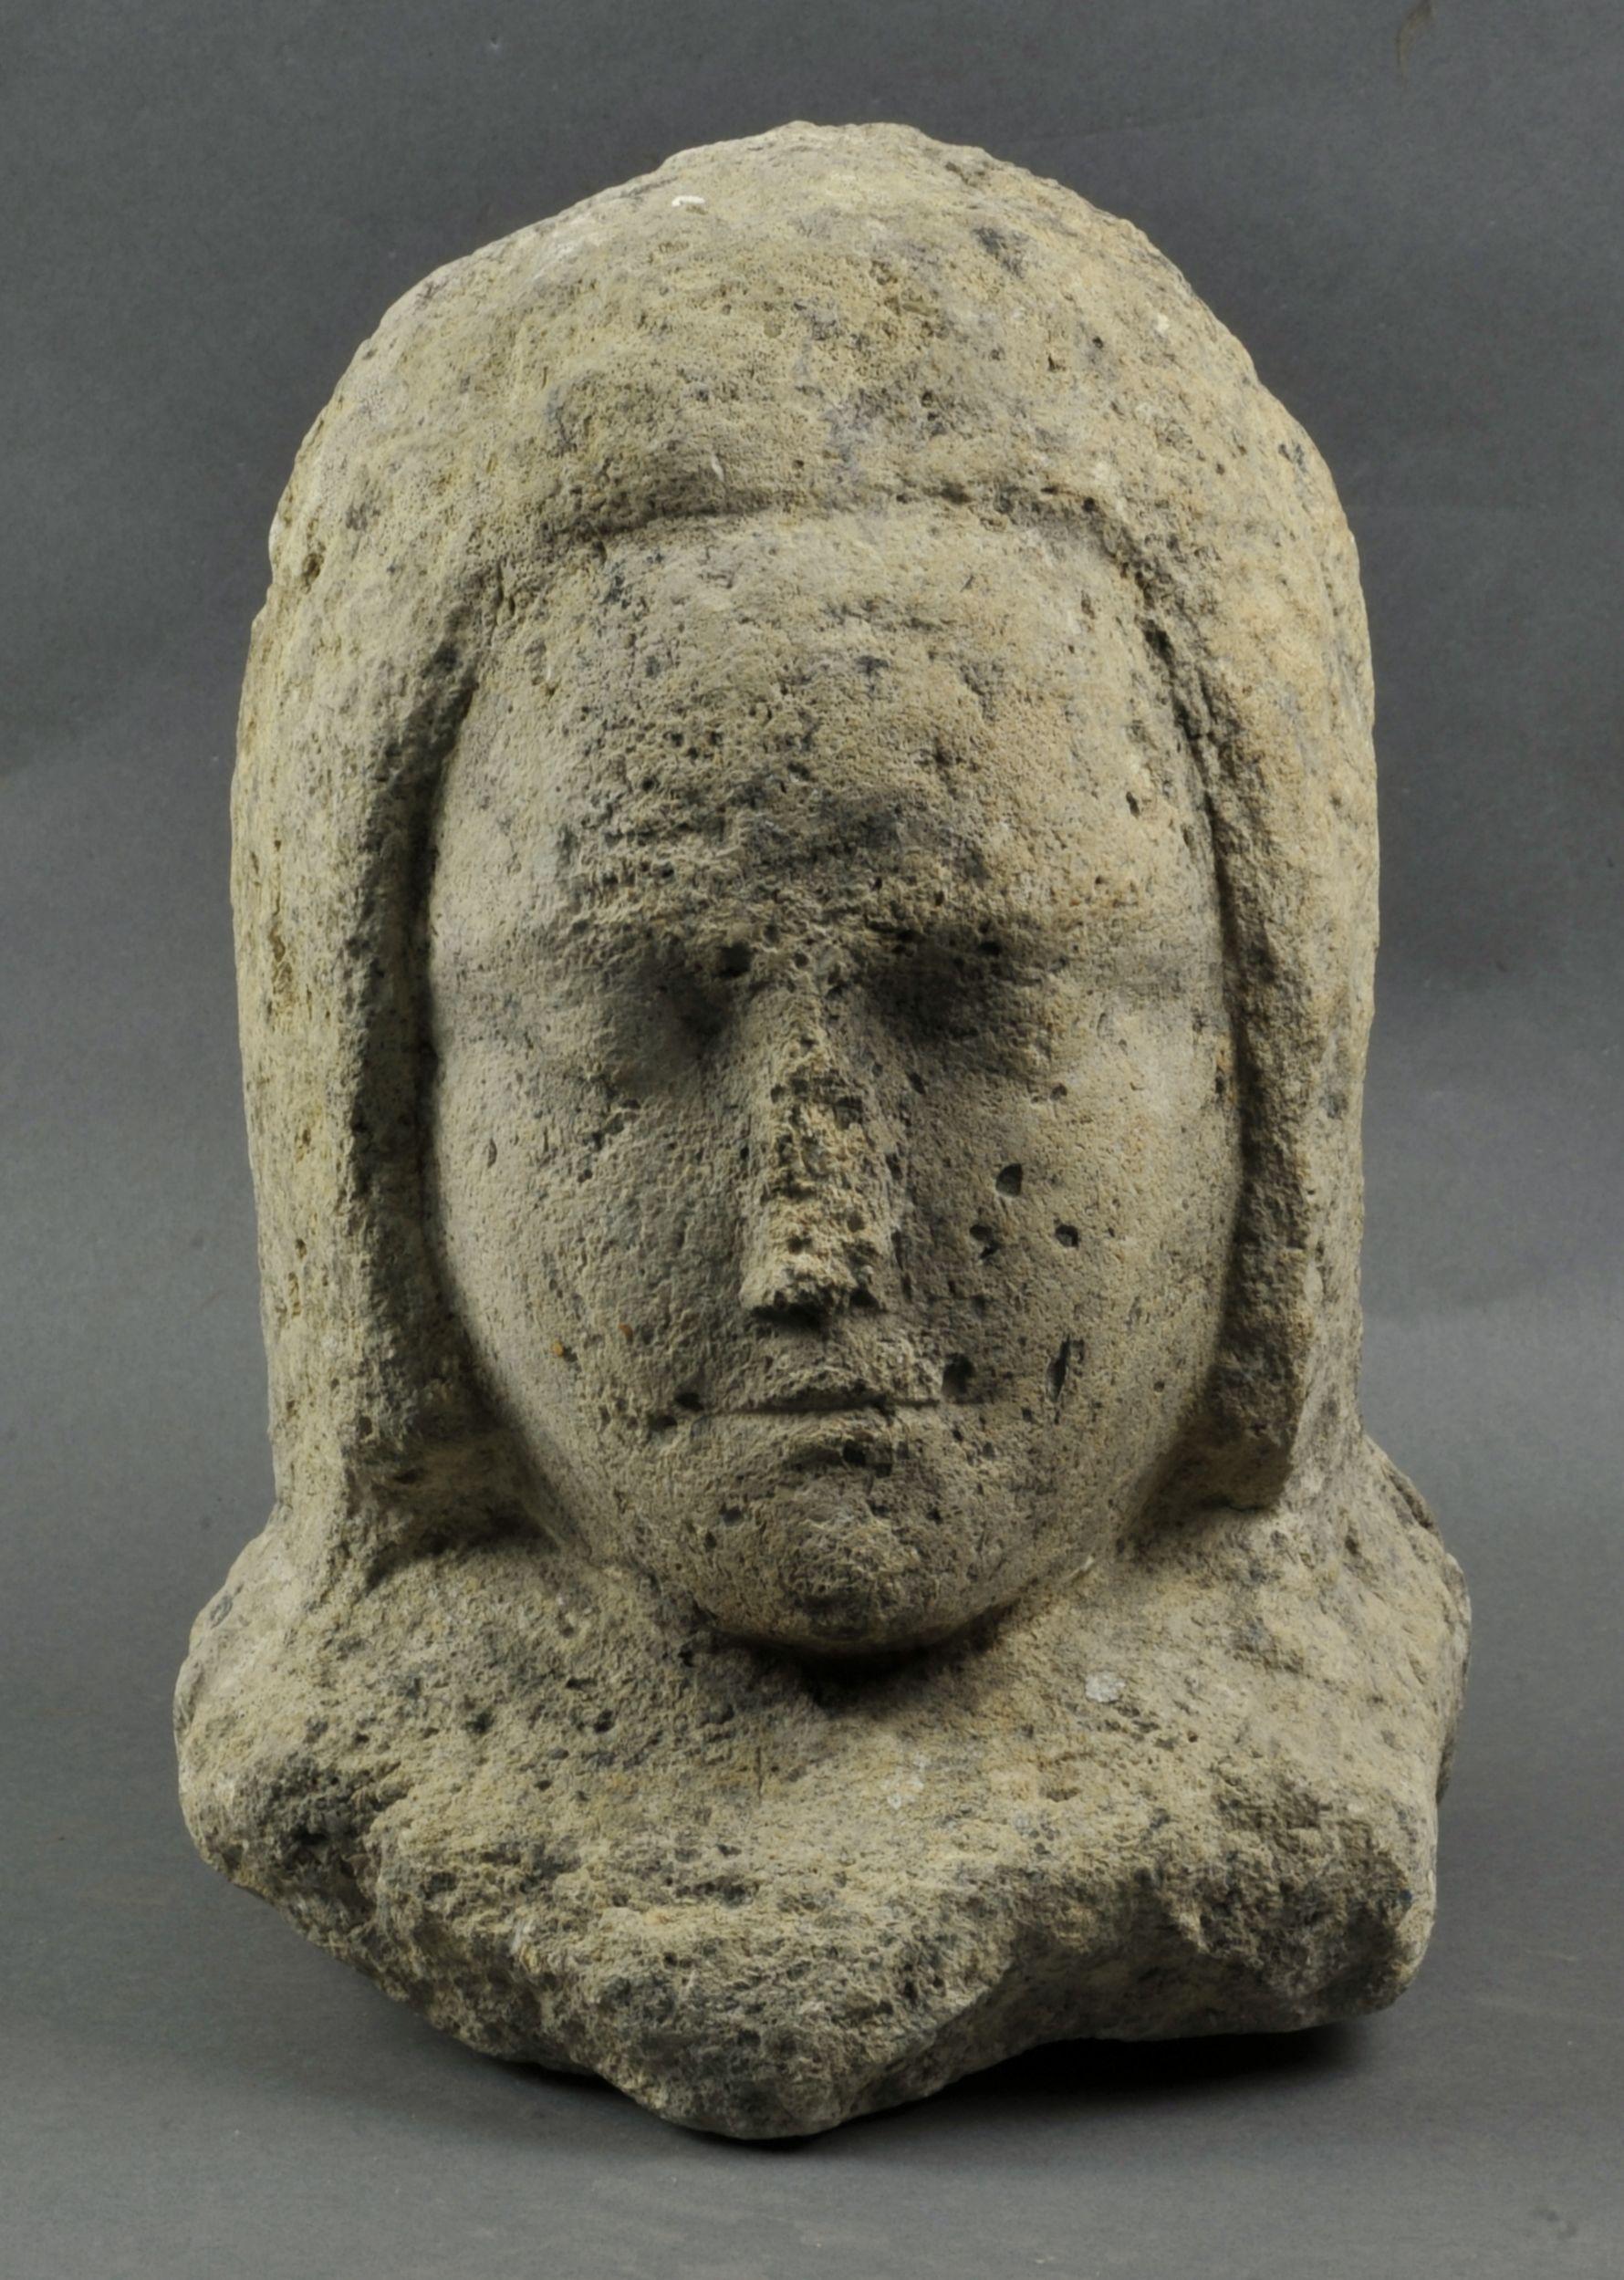 Sculpture In limestone from the 15th century representing a wooman probably a saint.

The face is round and serene, the hair long and the forehead clear.

Determination and devotion show through. A beautiful presence.

Good condition with some